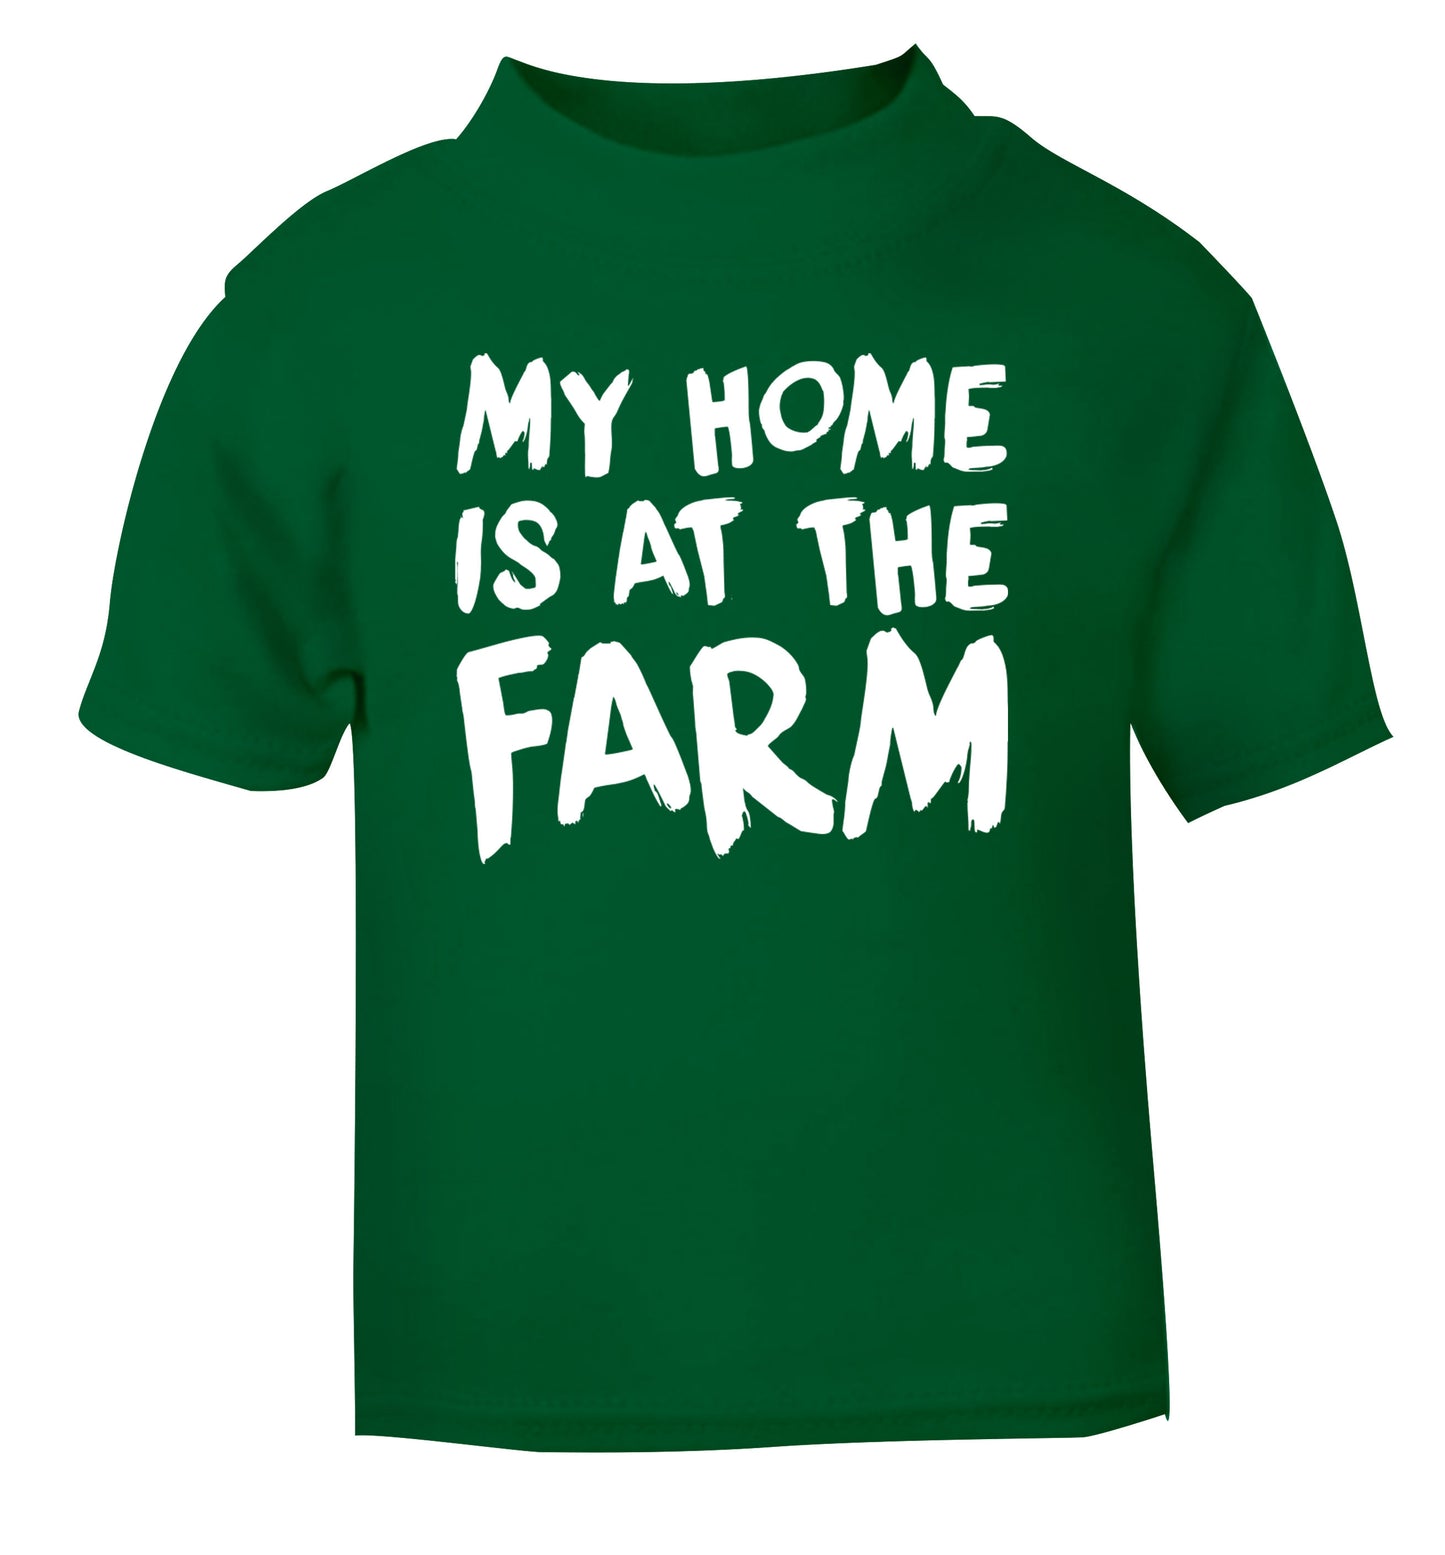 My home is at the farm green Baby Toddler Tshirt 2 Years